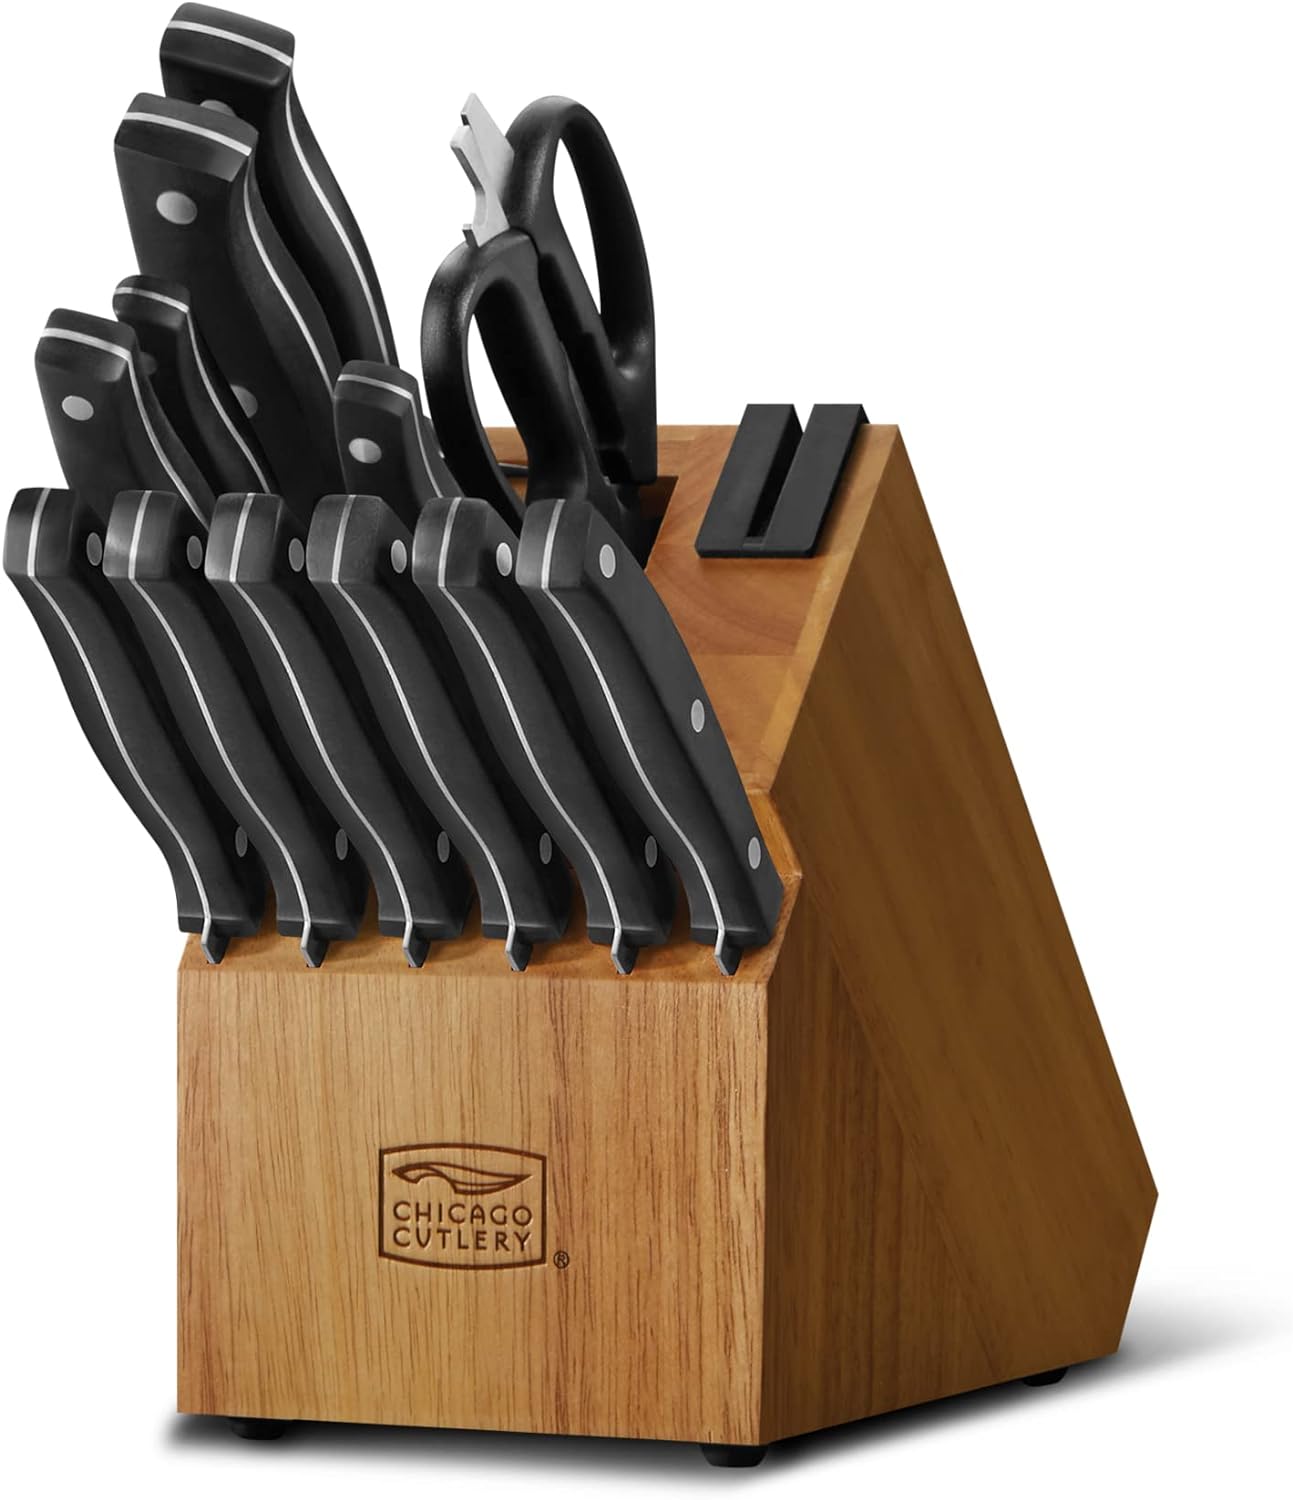 Chicago Cutlery Ellsworth Knife Set Review